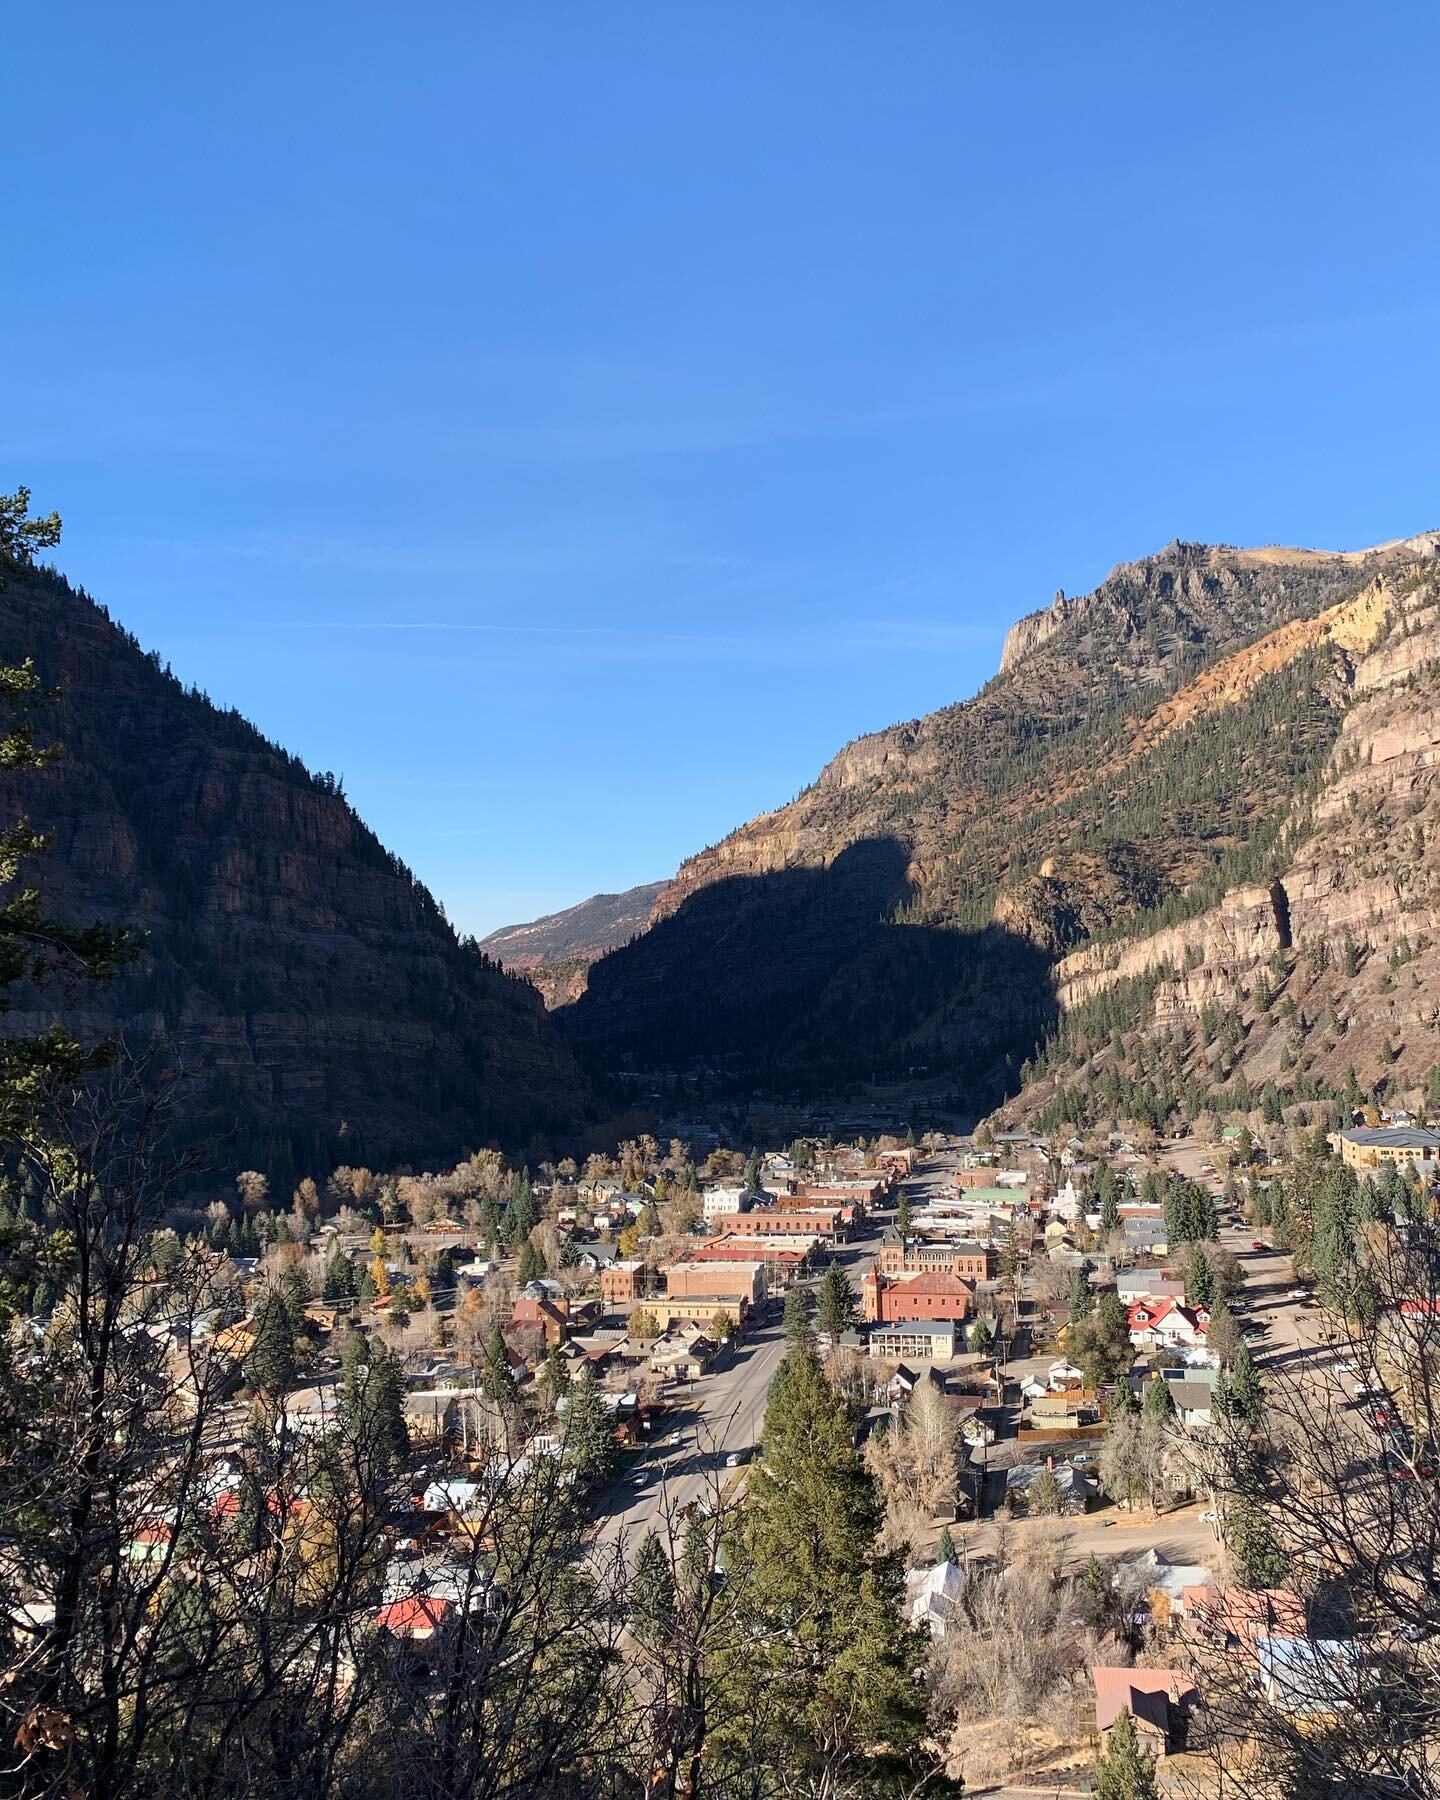 Ouray and Crestone. We&rsquo;ve visited 8 towns (and counting) on this hot springs roadtrip, and the energy feels different in these two places, expansive in complementary ways. For me, Ouray resonates with the lower three energy centers&mdash;a grou